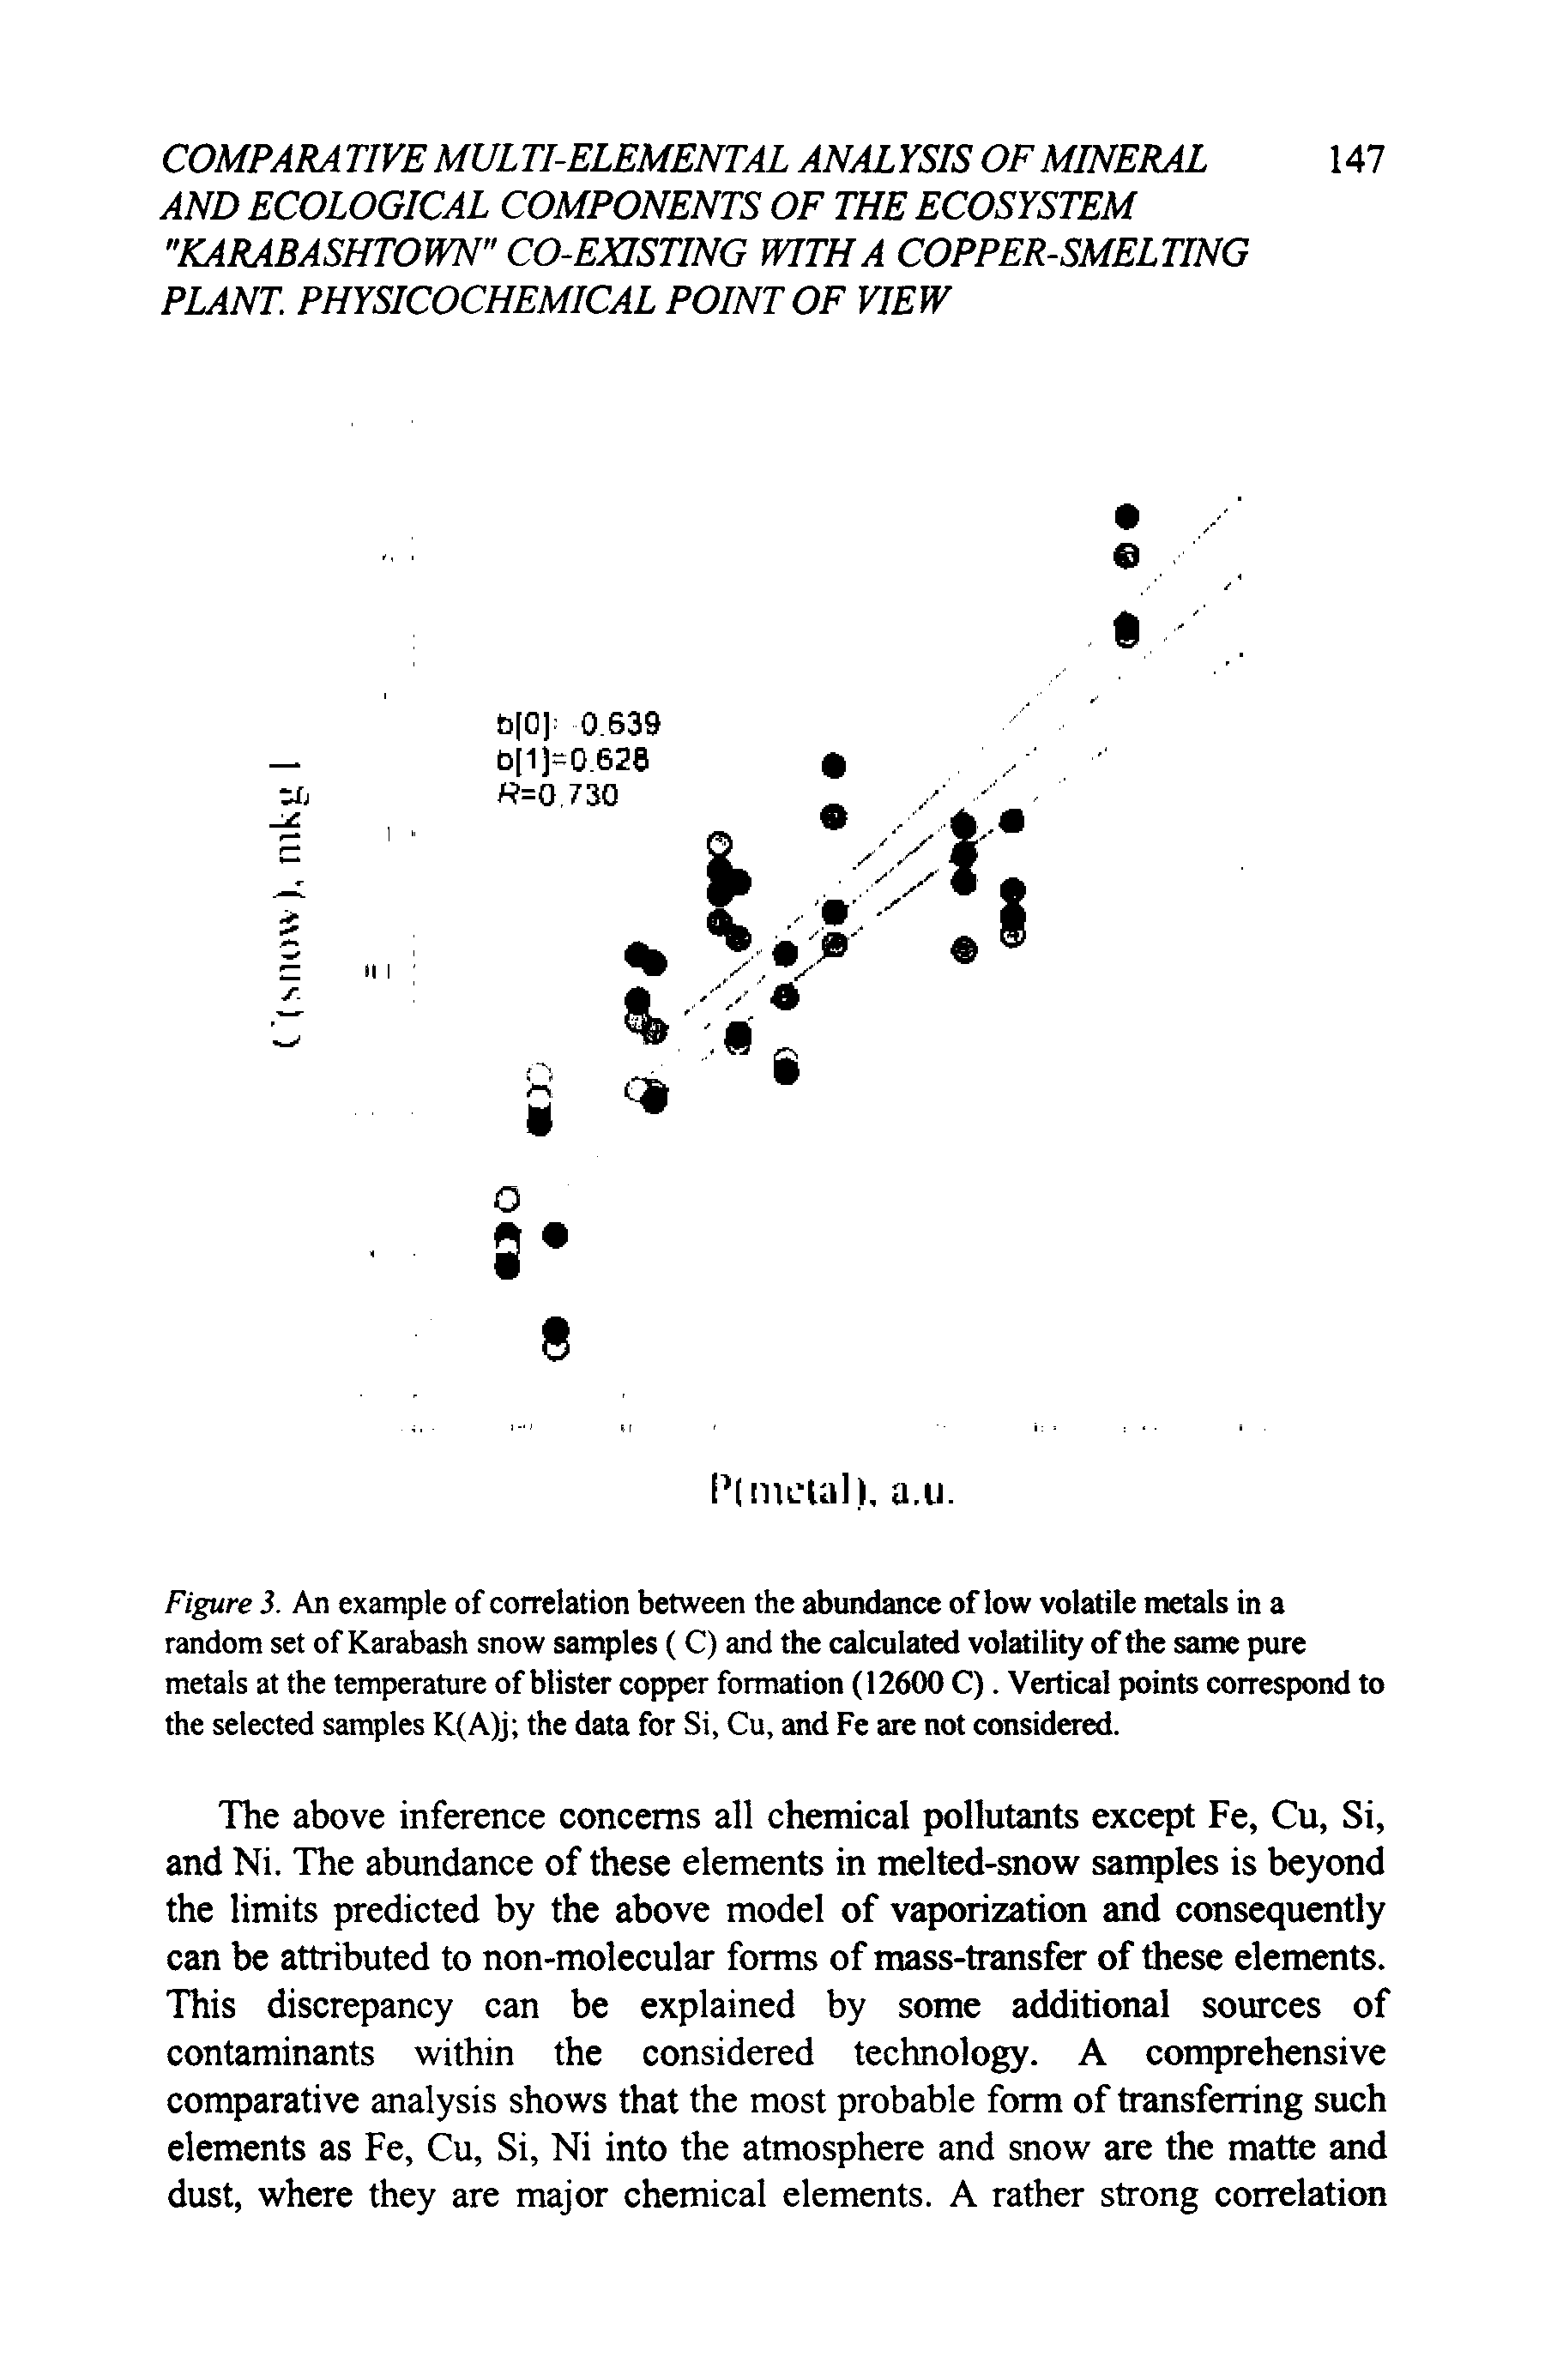 Figure 3. An example of correlation between the abundance of low volatile metals in a random set of Karabash snow samples (C) and the calculated volatility of the same pure metals at the temperature of blister copper formation (12600 C). Vertical points correspond to the selected samples K(A)j the data for Si, Cu, and Fe are not considered.